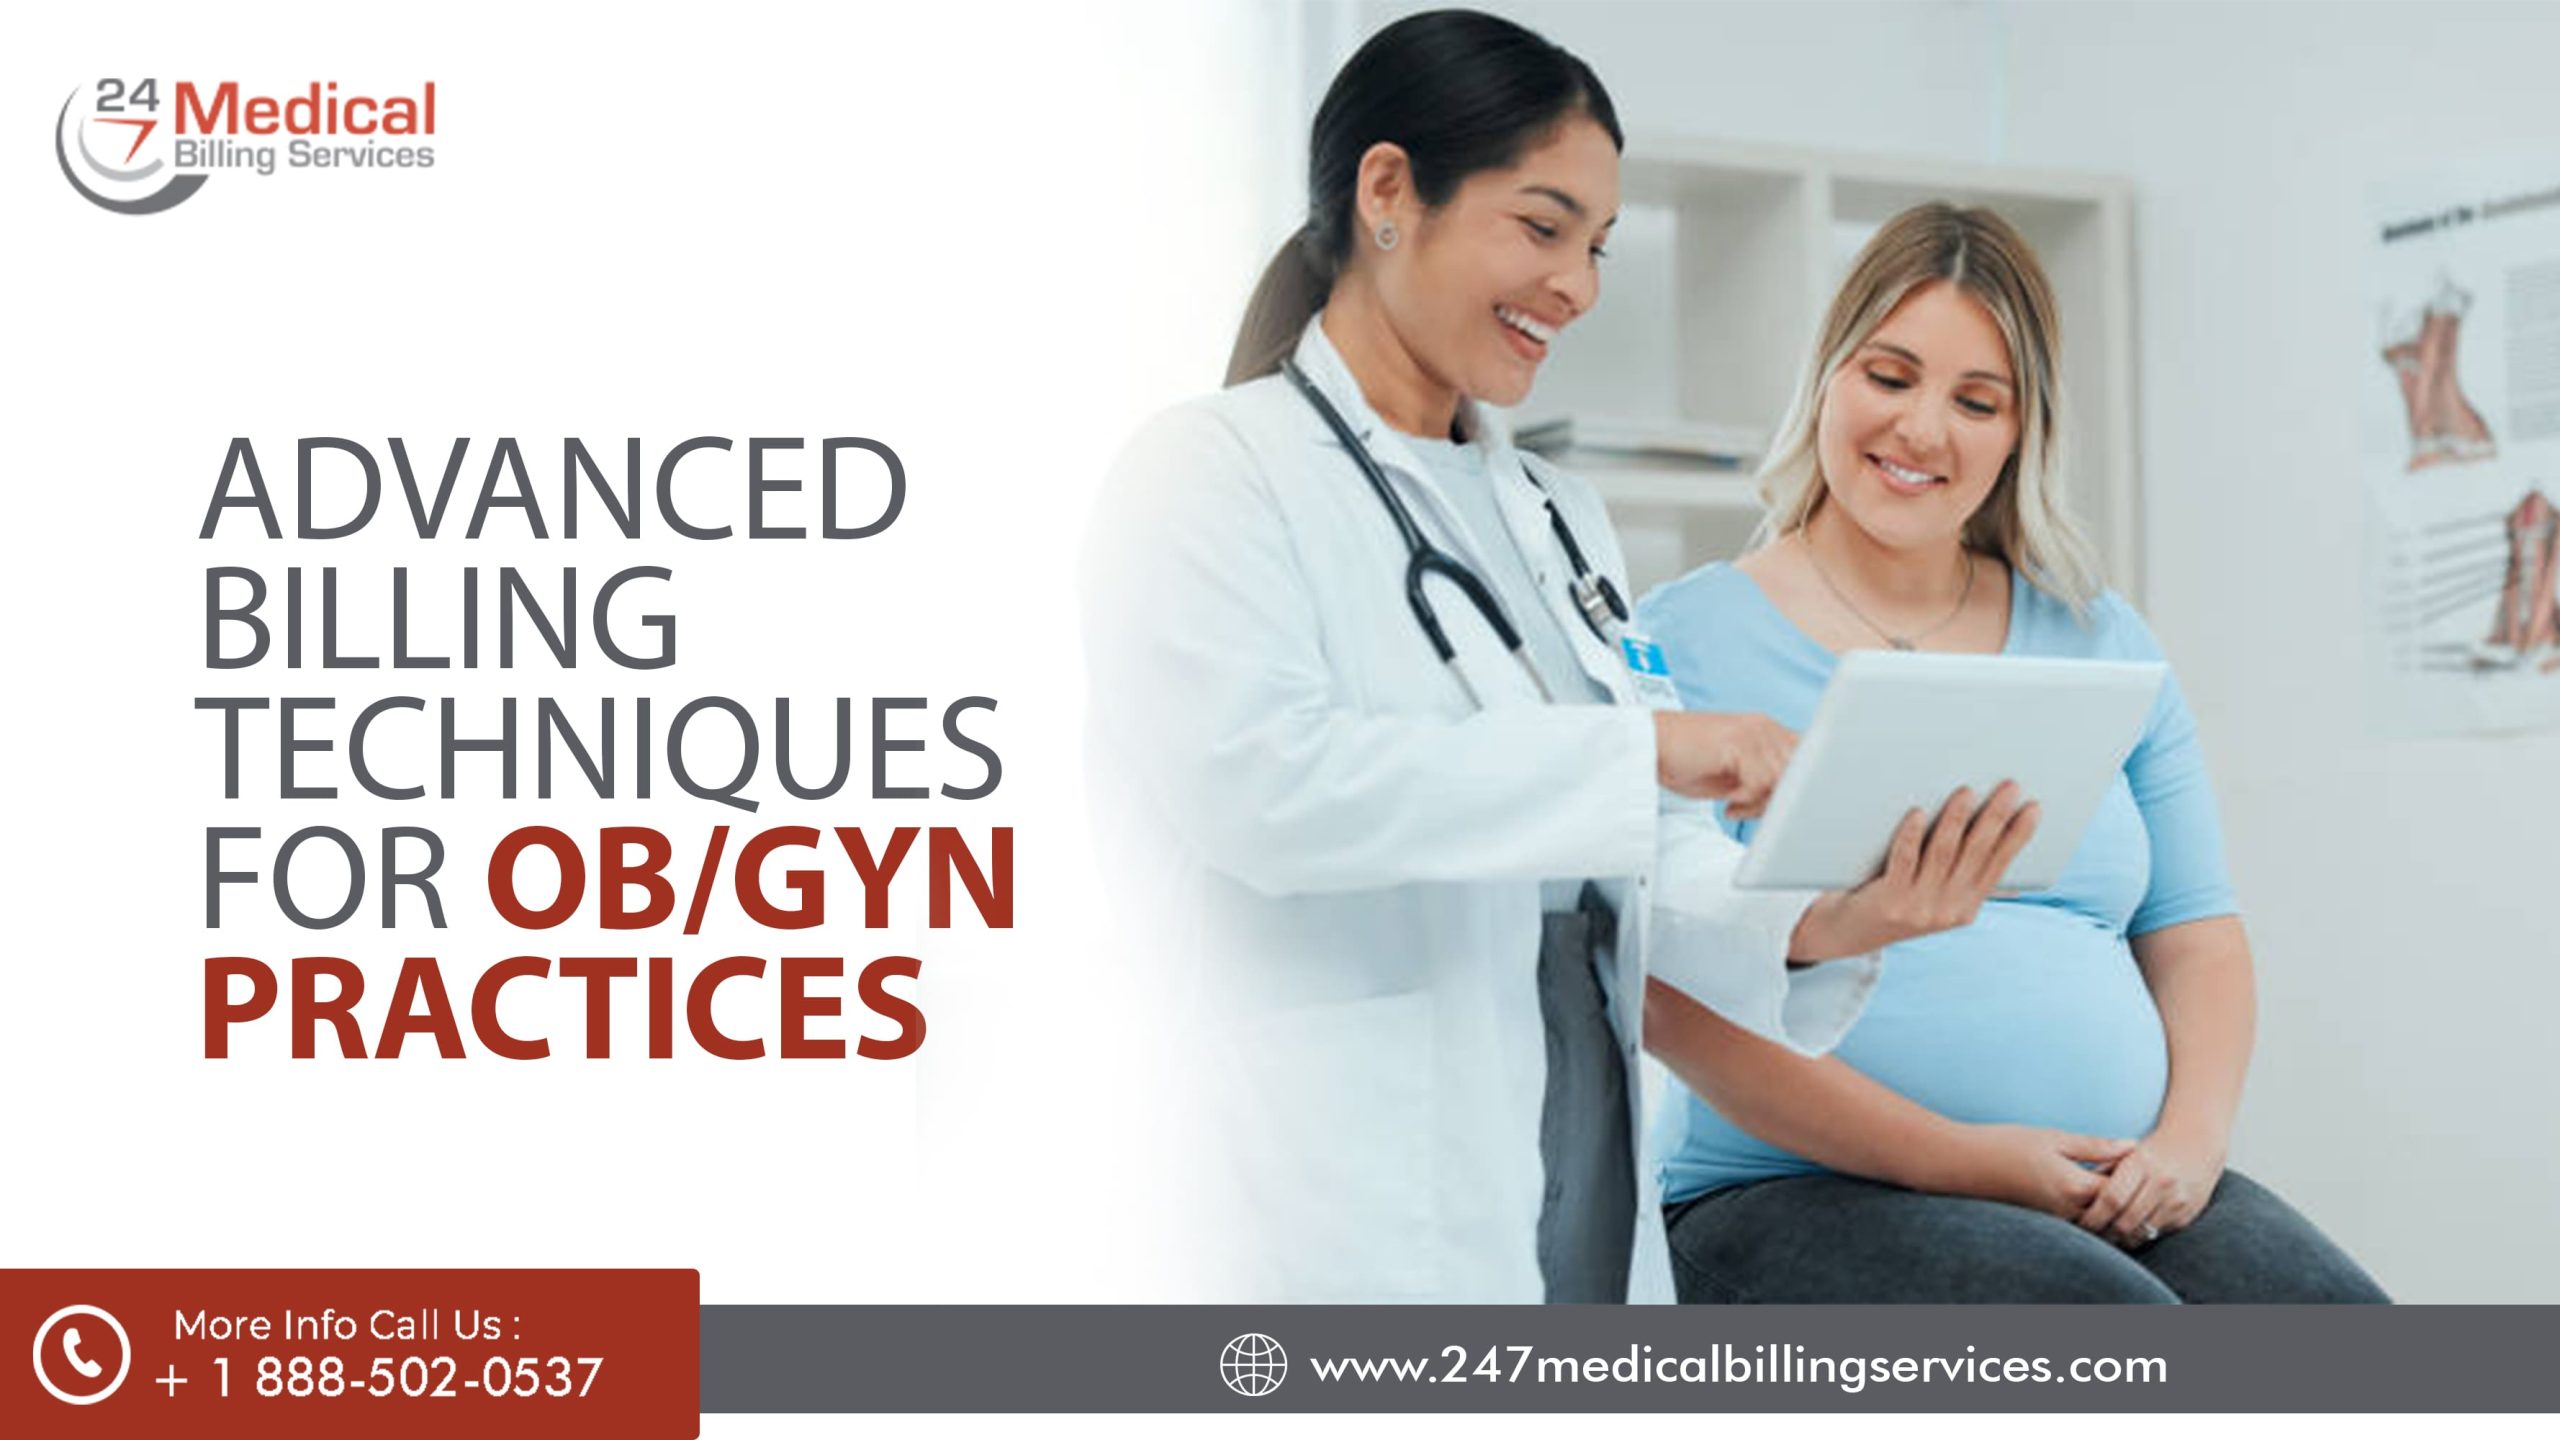  Advanced Billing Techniques for OB/GYN Practices